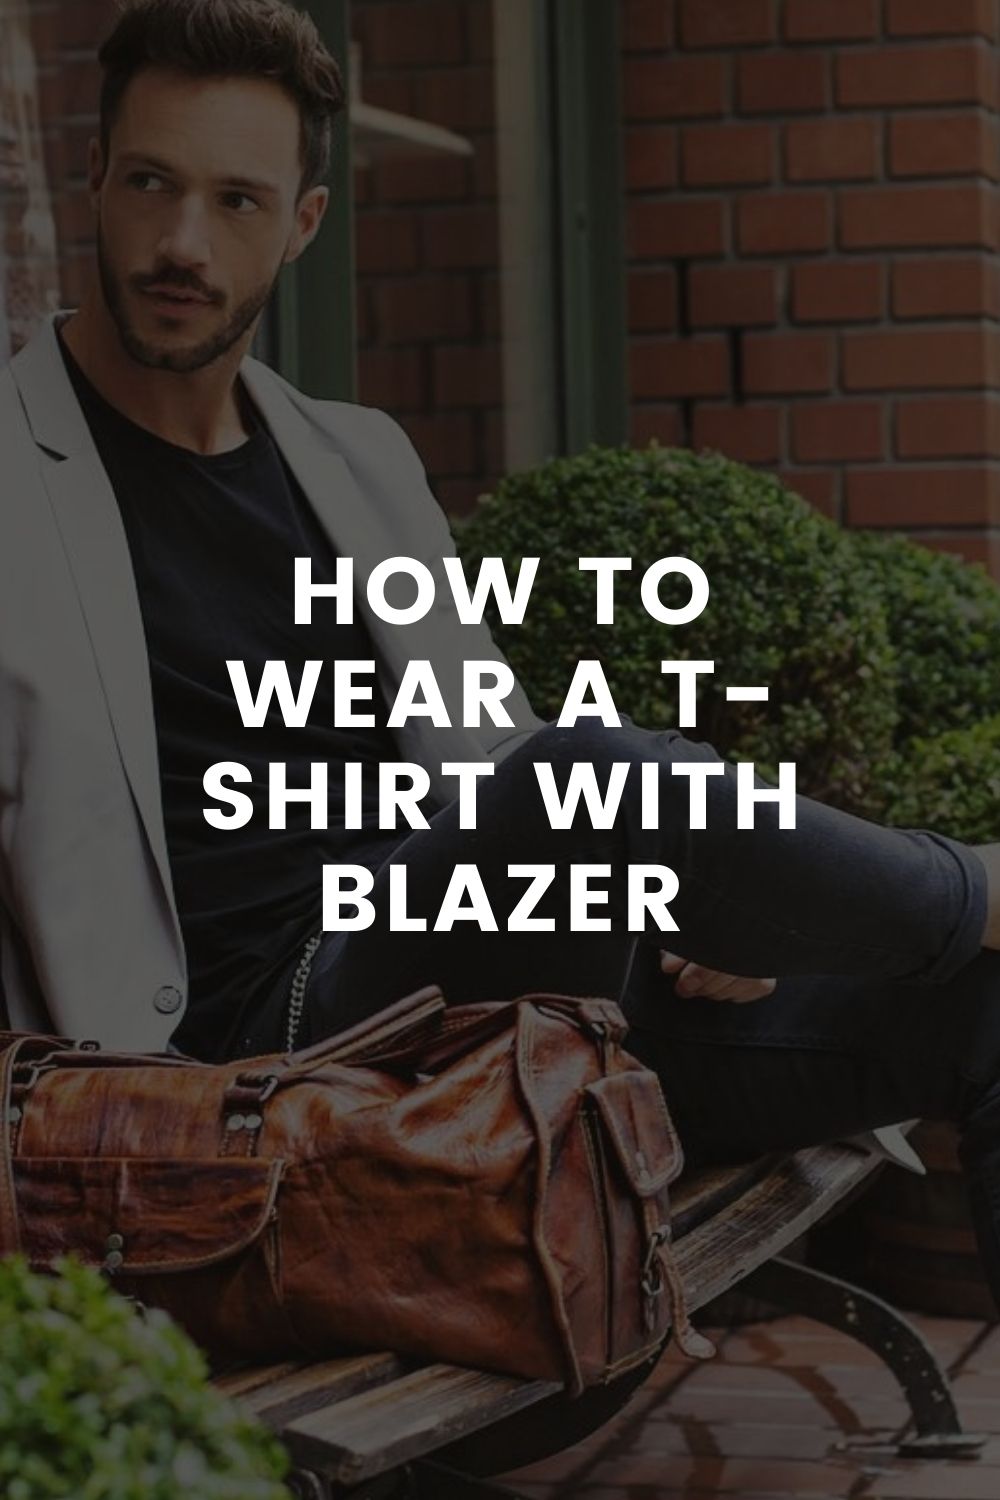 How To Wear A T-shirt With Blazer